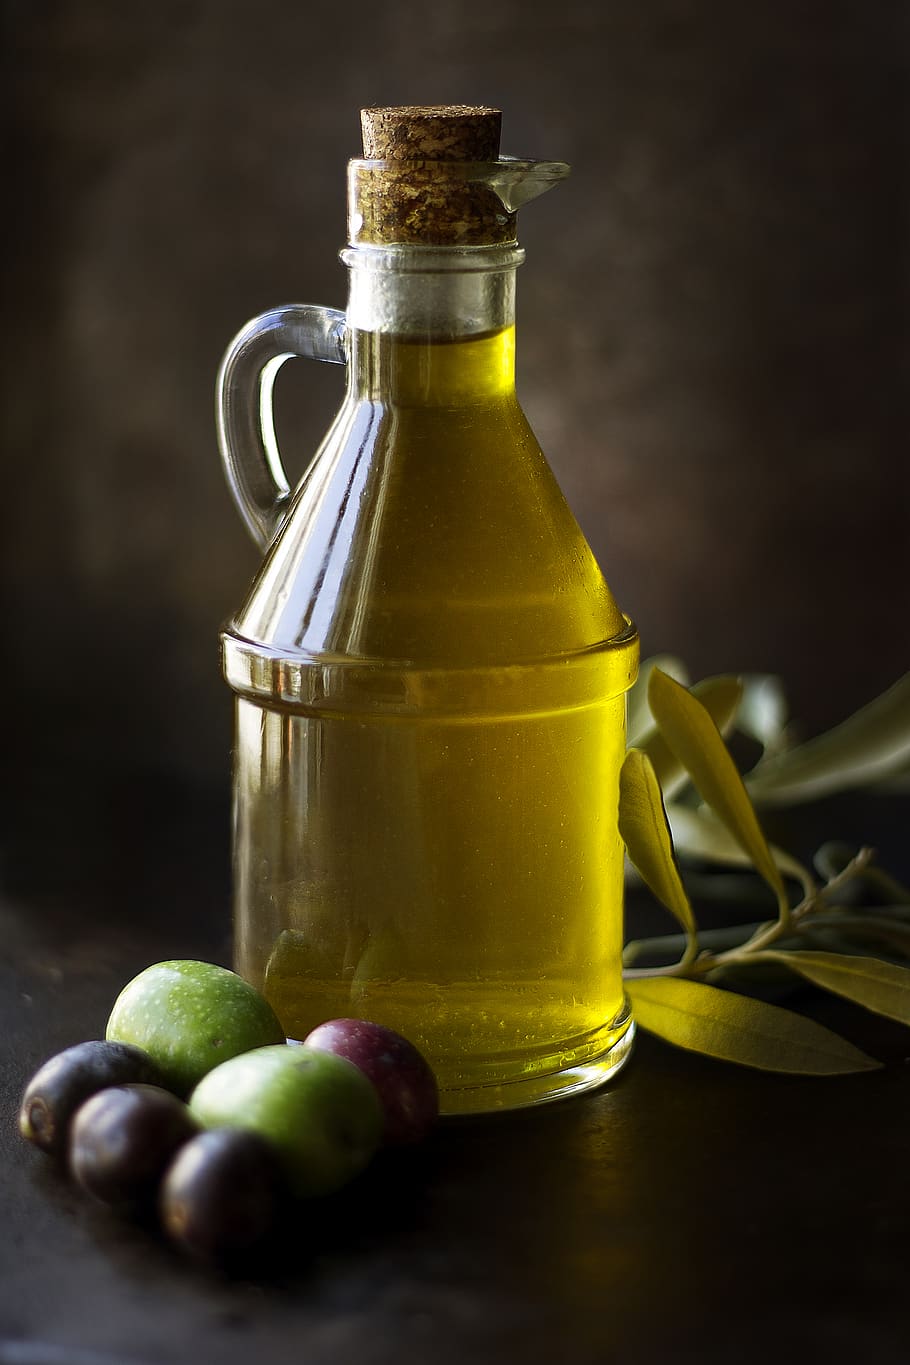 HD wallpaper: extra virgin olive oil, food and drink, wellbeing ...